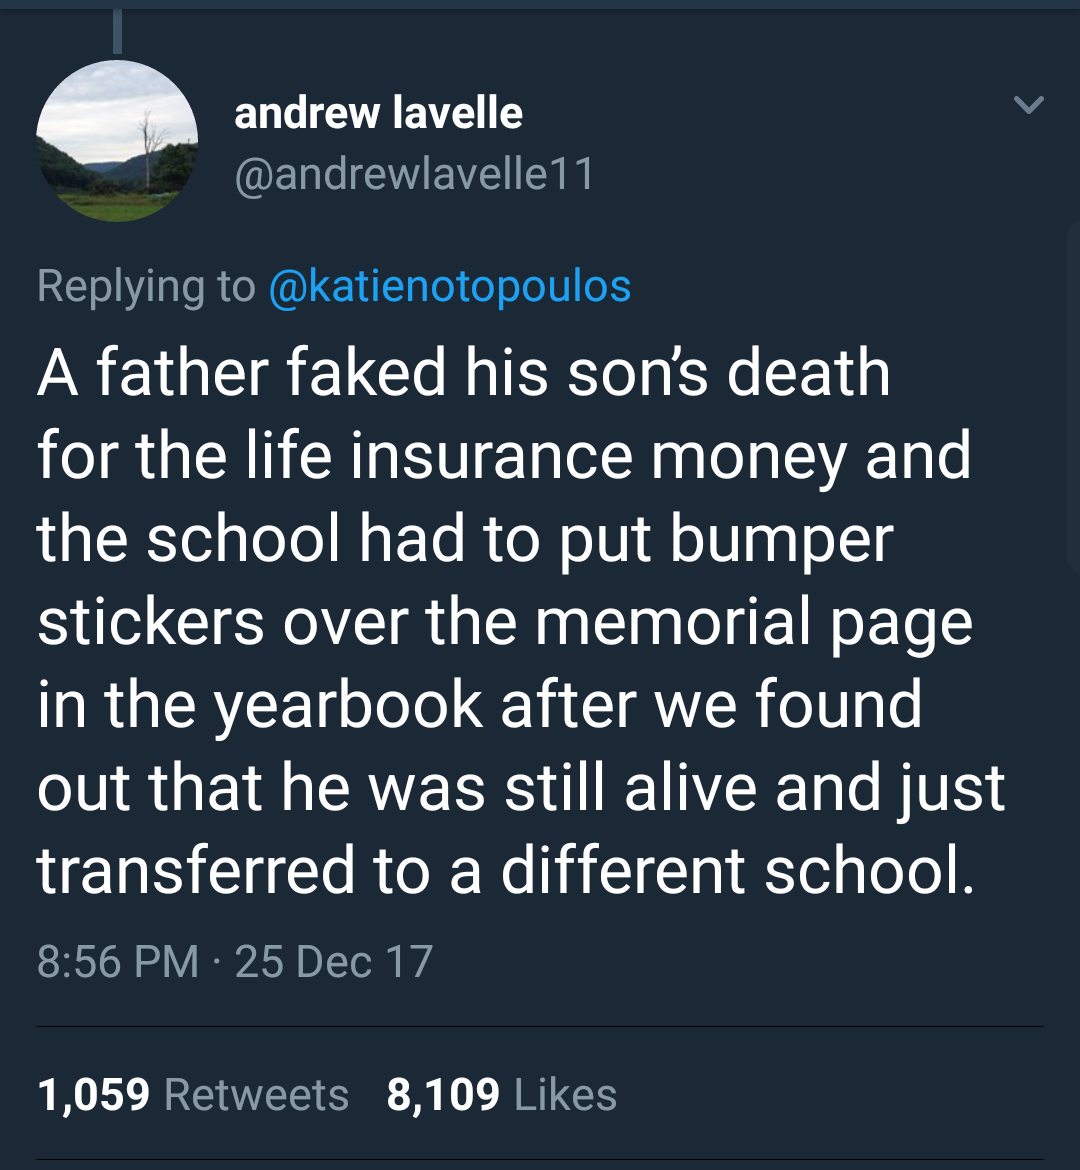 wildest school stories - andrew lavelle A father faked his son's death for the life insurance money and the school had to put bumper stickers over the memorial page in the yearbook after we found out that he was still alive and just transferred to a diffe